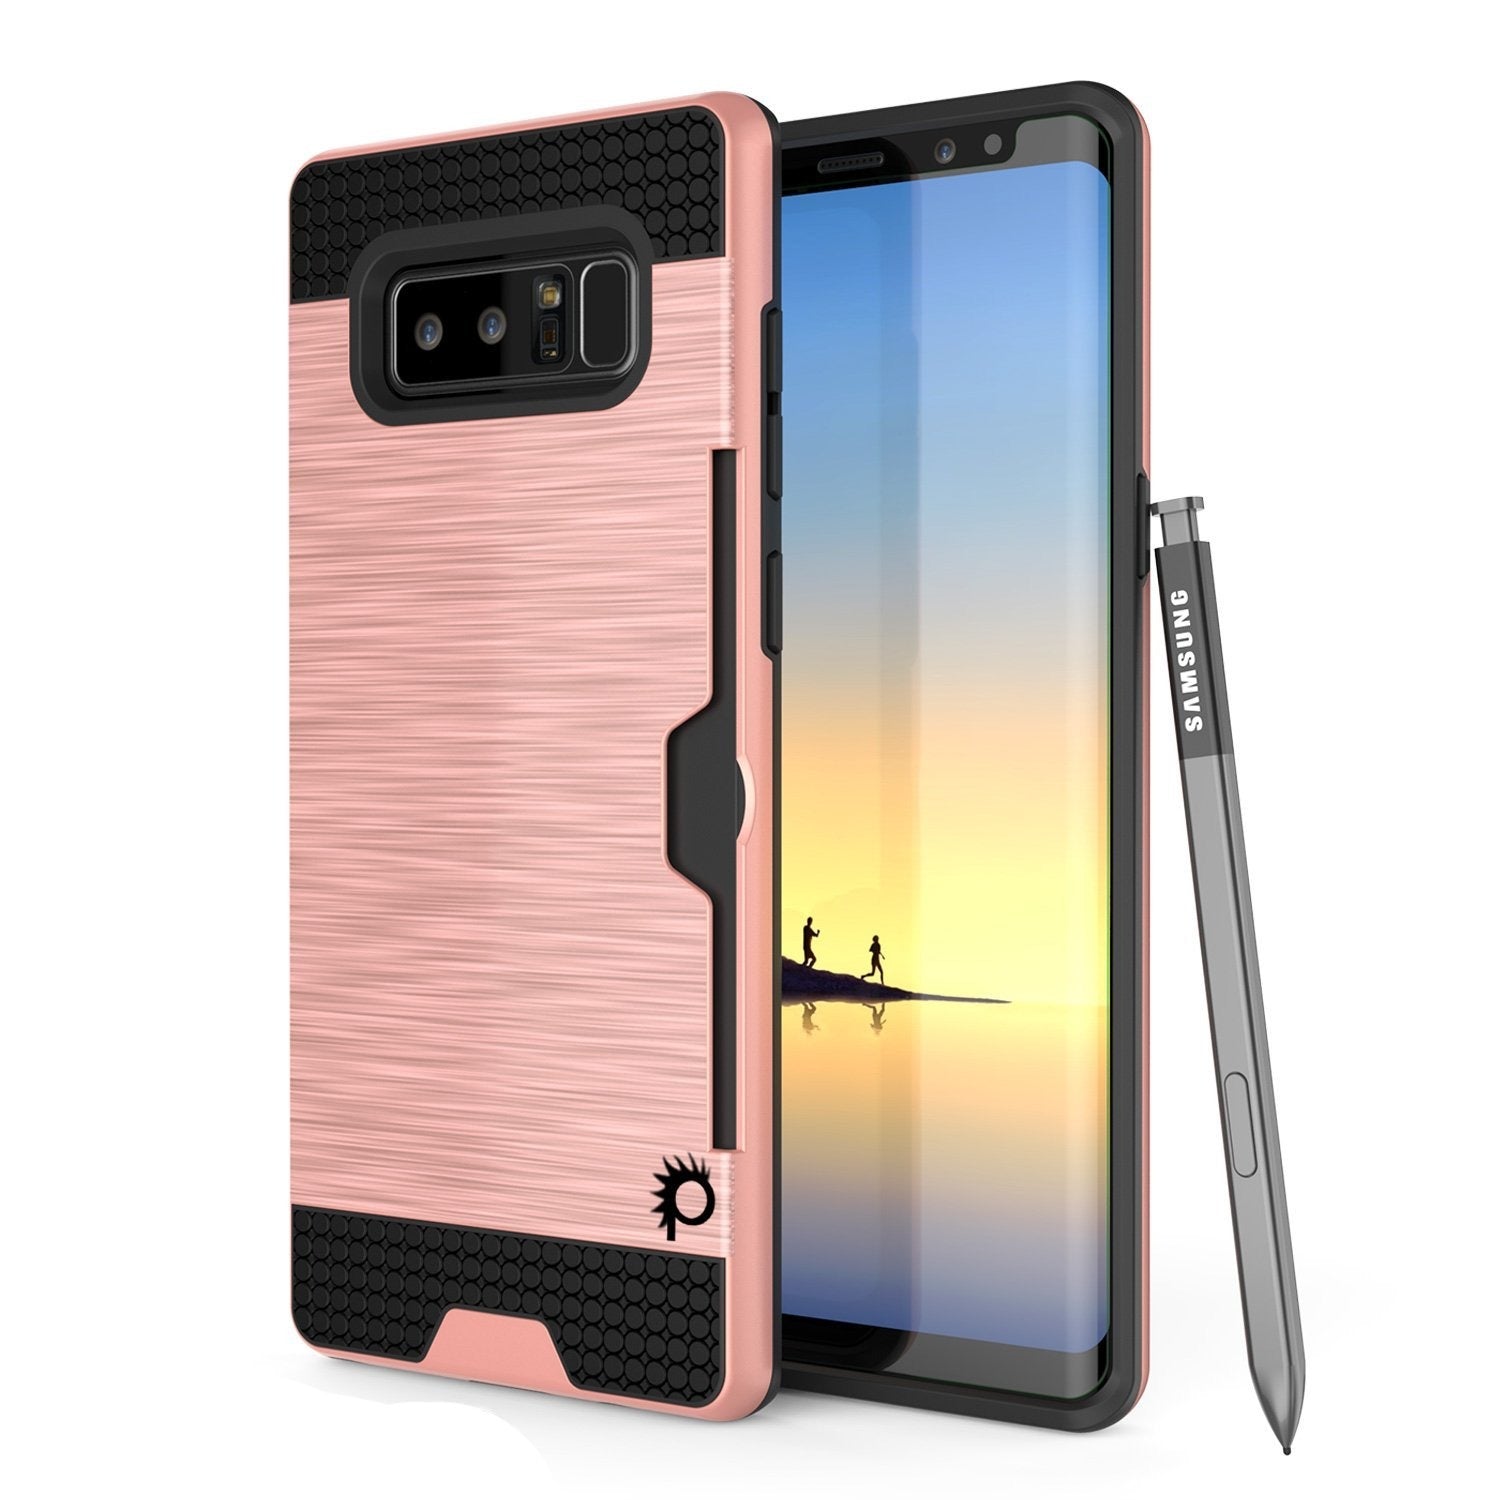 Galaxy Note 8 Case, PUNKcase [SLOT Series] Slim Fit  Samsung Note 8 [Rose] (Color in image: Rose)